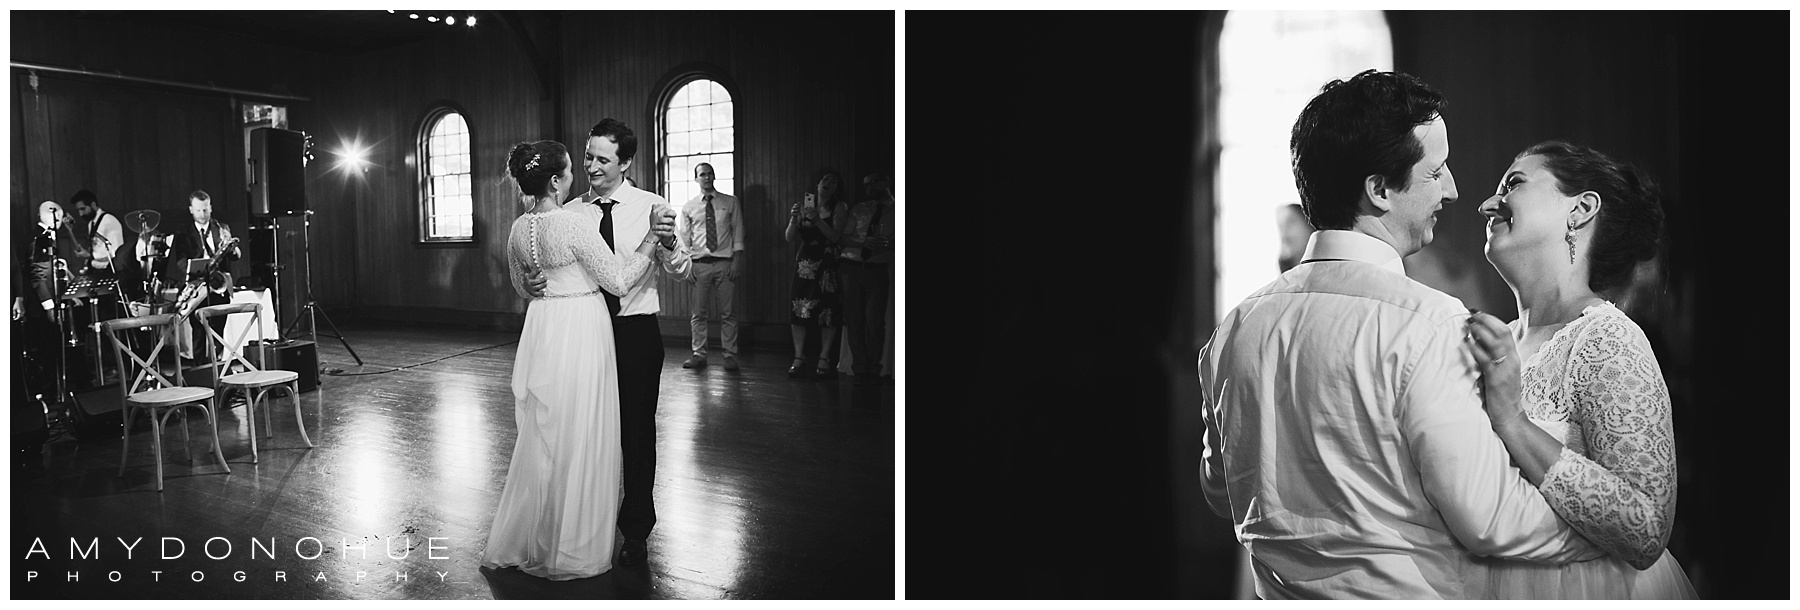 Bride and Groom First Dance | Amy Donohue Photography